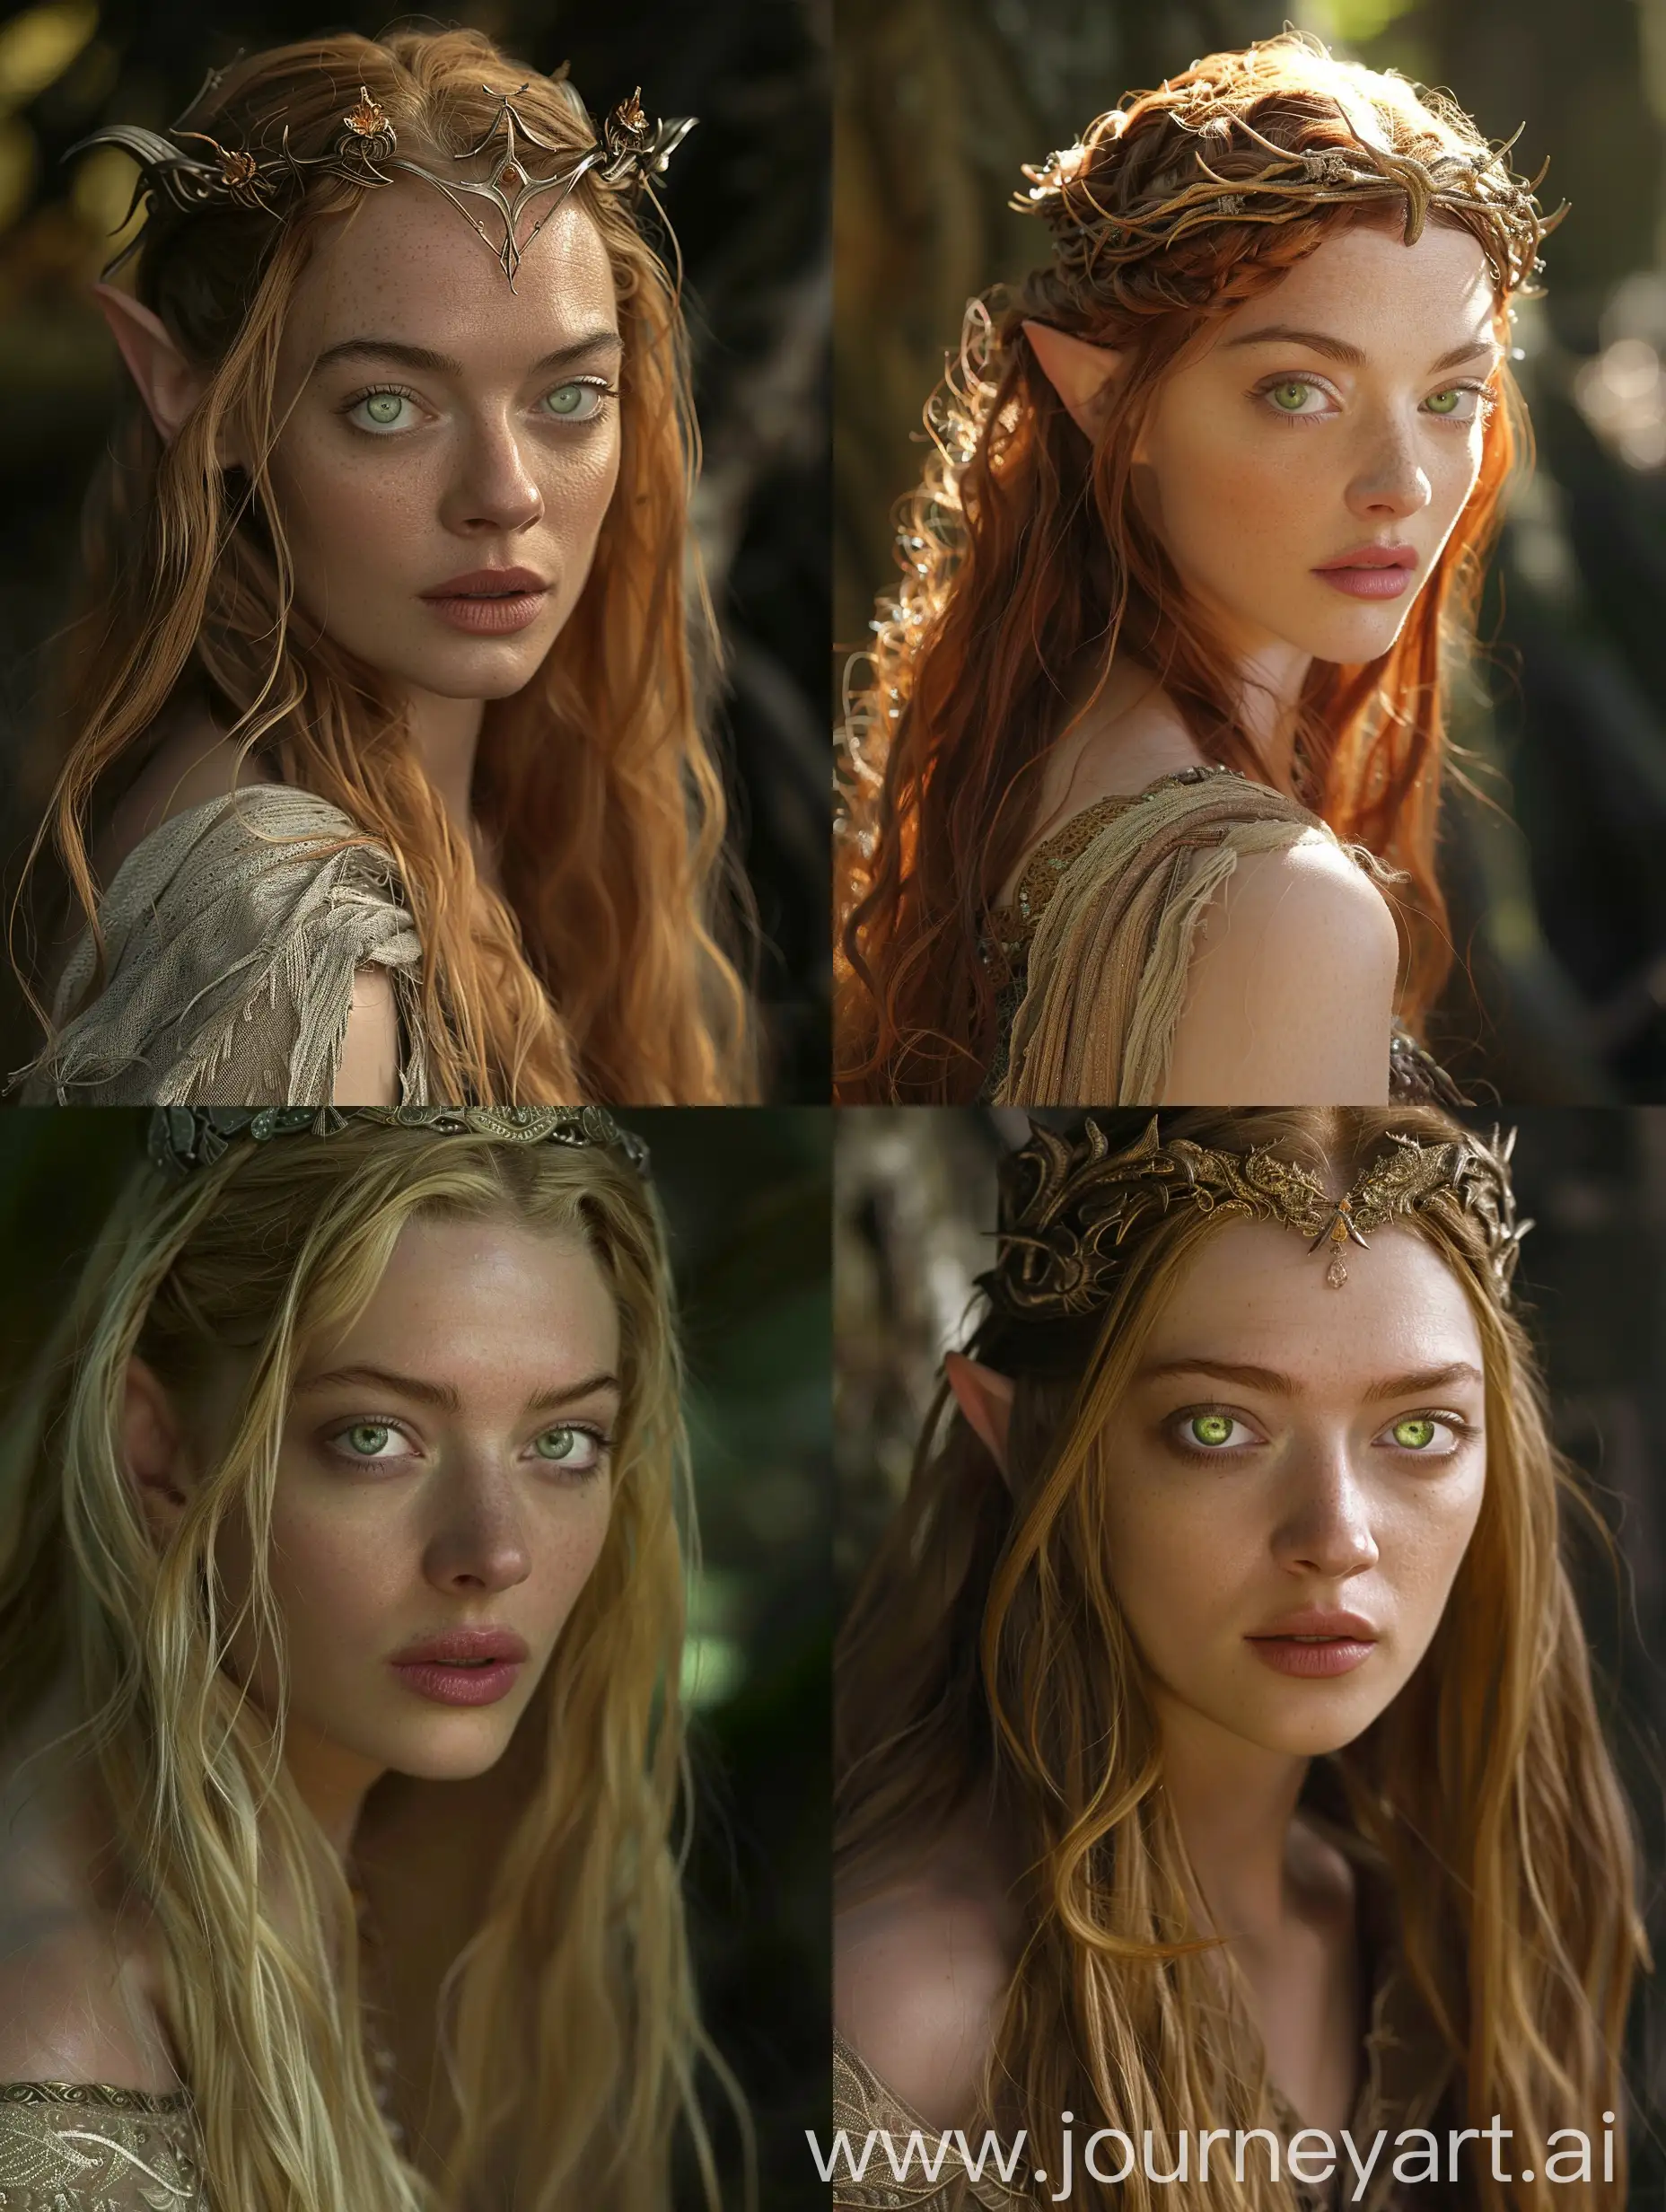 Amanda-Seyfried-as-the-Elven-Queen-of-the-Forest-with-Enchanting-Green-Eyes